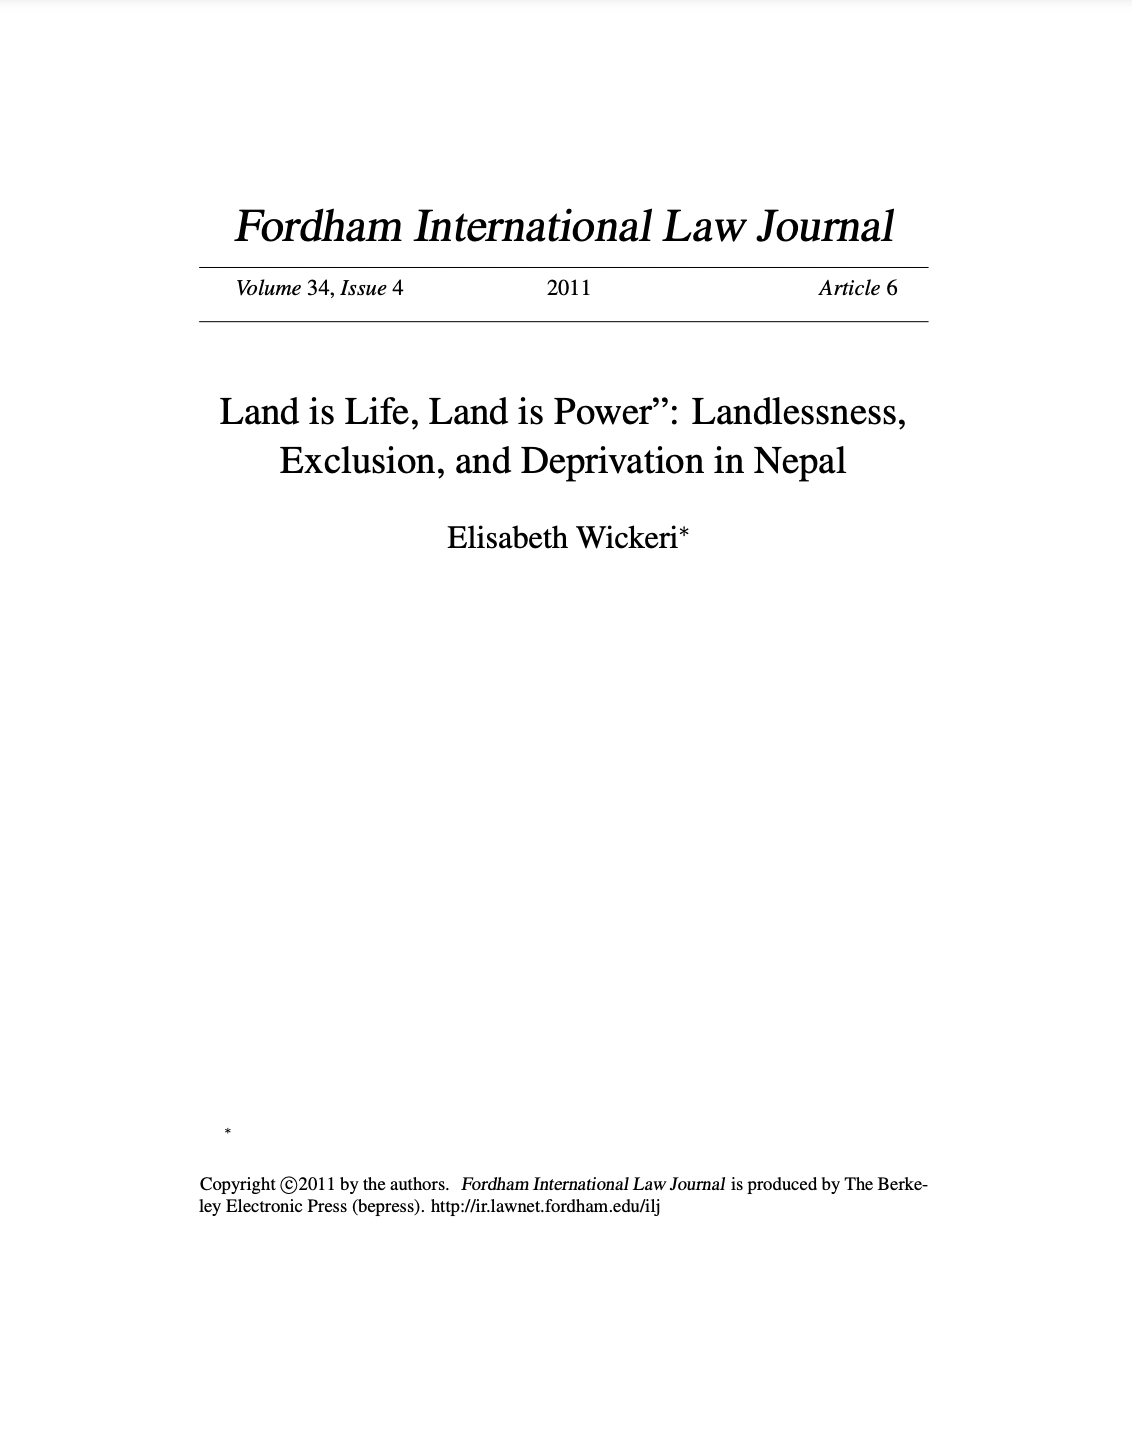 Land is Life, Land is Power”: Landlessness, Exclusion, and Deprivation in Nepal